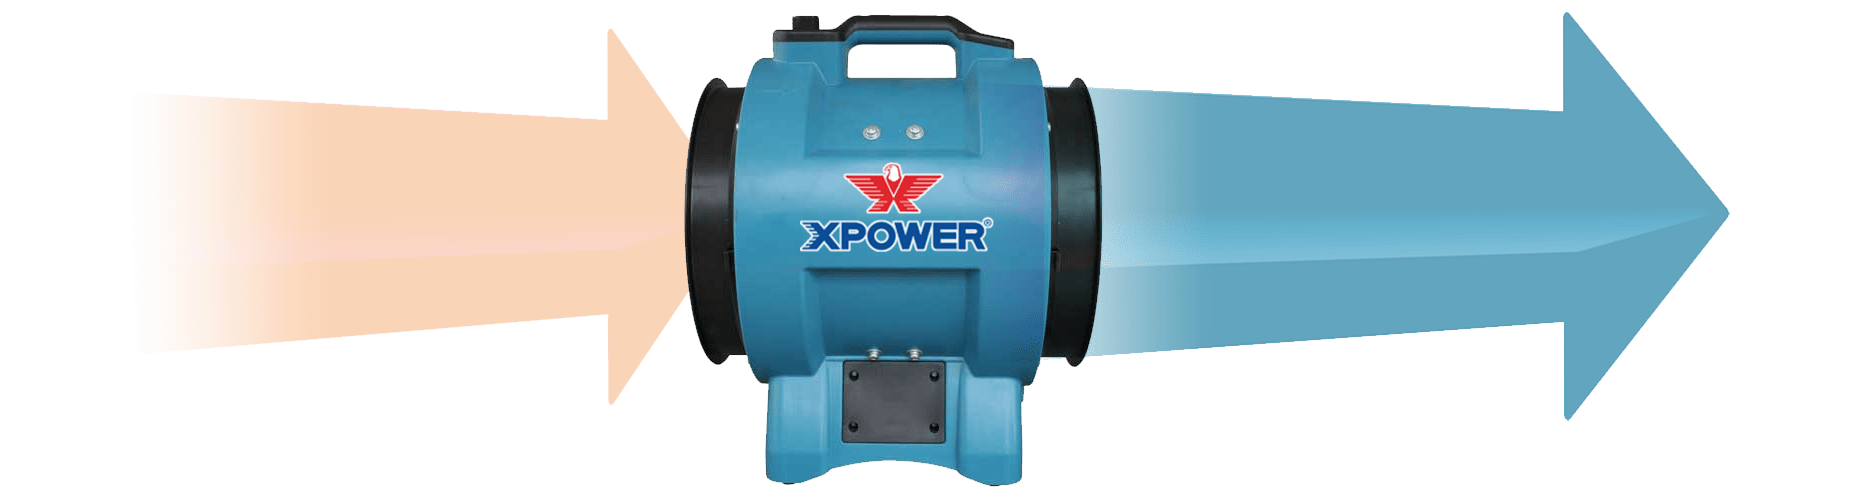 XPOWER X-12 Variable Speed 12inch Diameter Industrial Confined Space Ventilator Fan